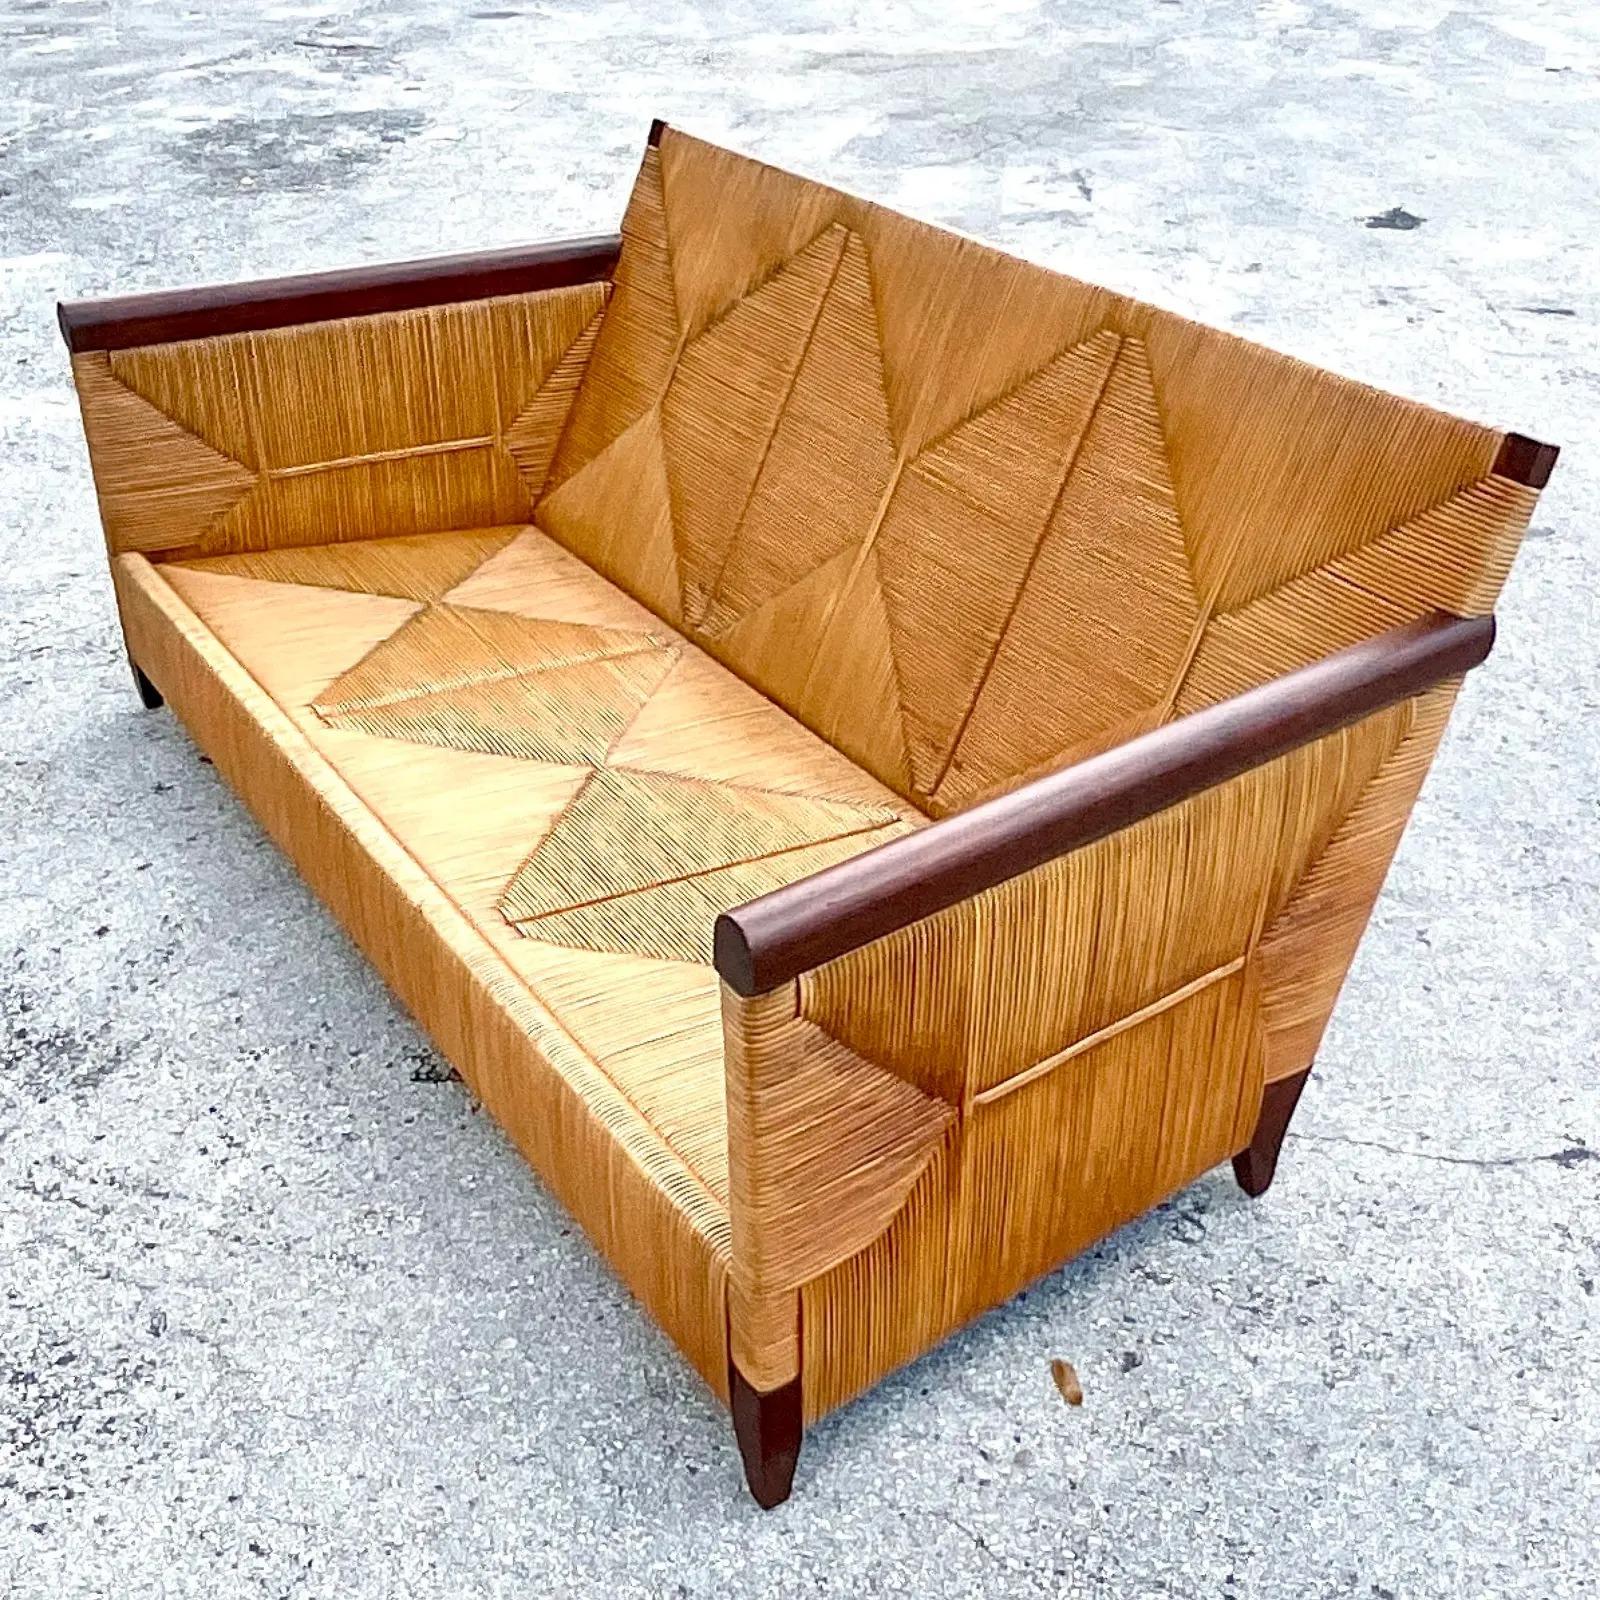 Fantastic vintage Coastal sofa. Designed by John Hutton for Donghia. Part of the coveted Merbau collection. Beautiful wood trimmed detail with a warm rattan body. Tagged on the bottom. Stained Mahogany arms and feet.